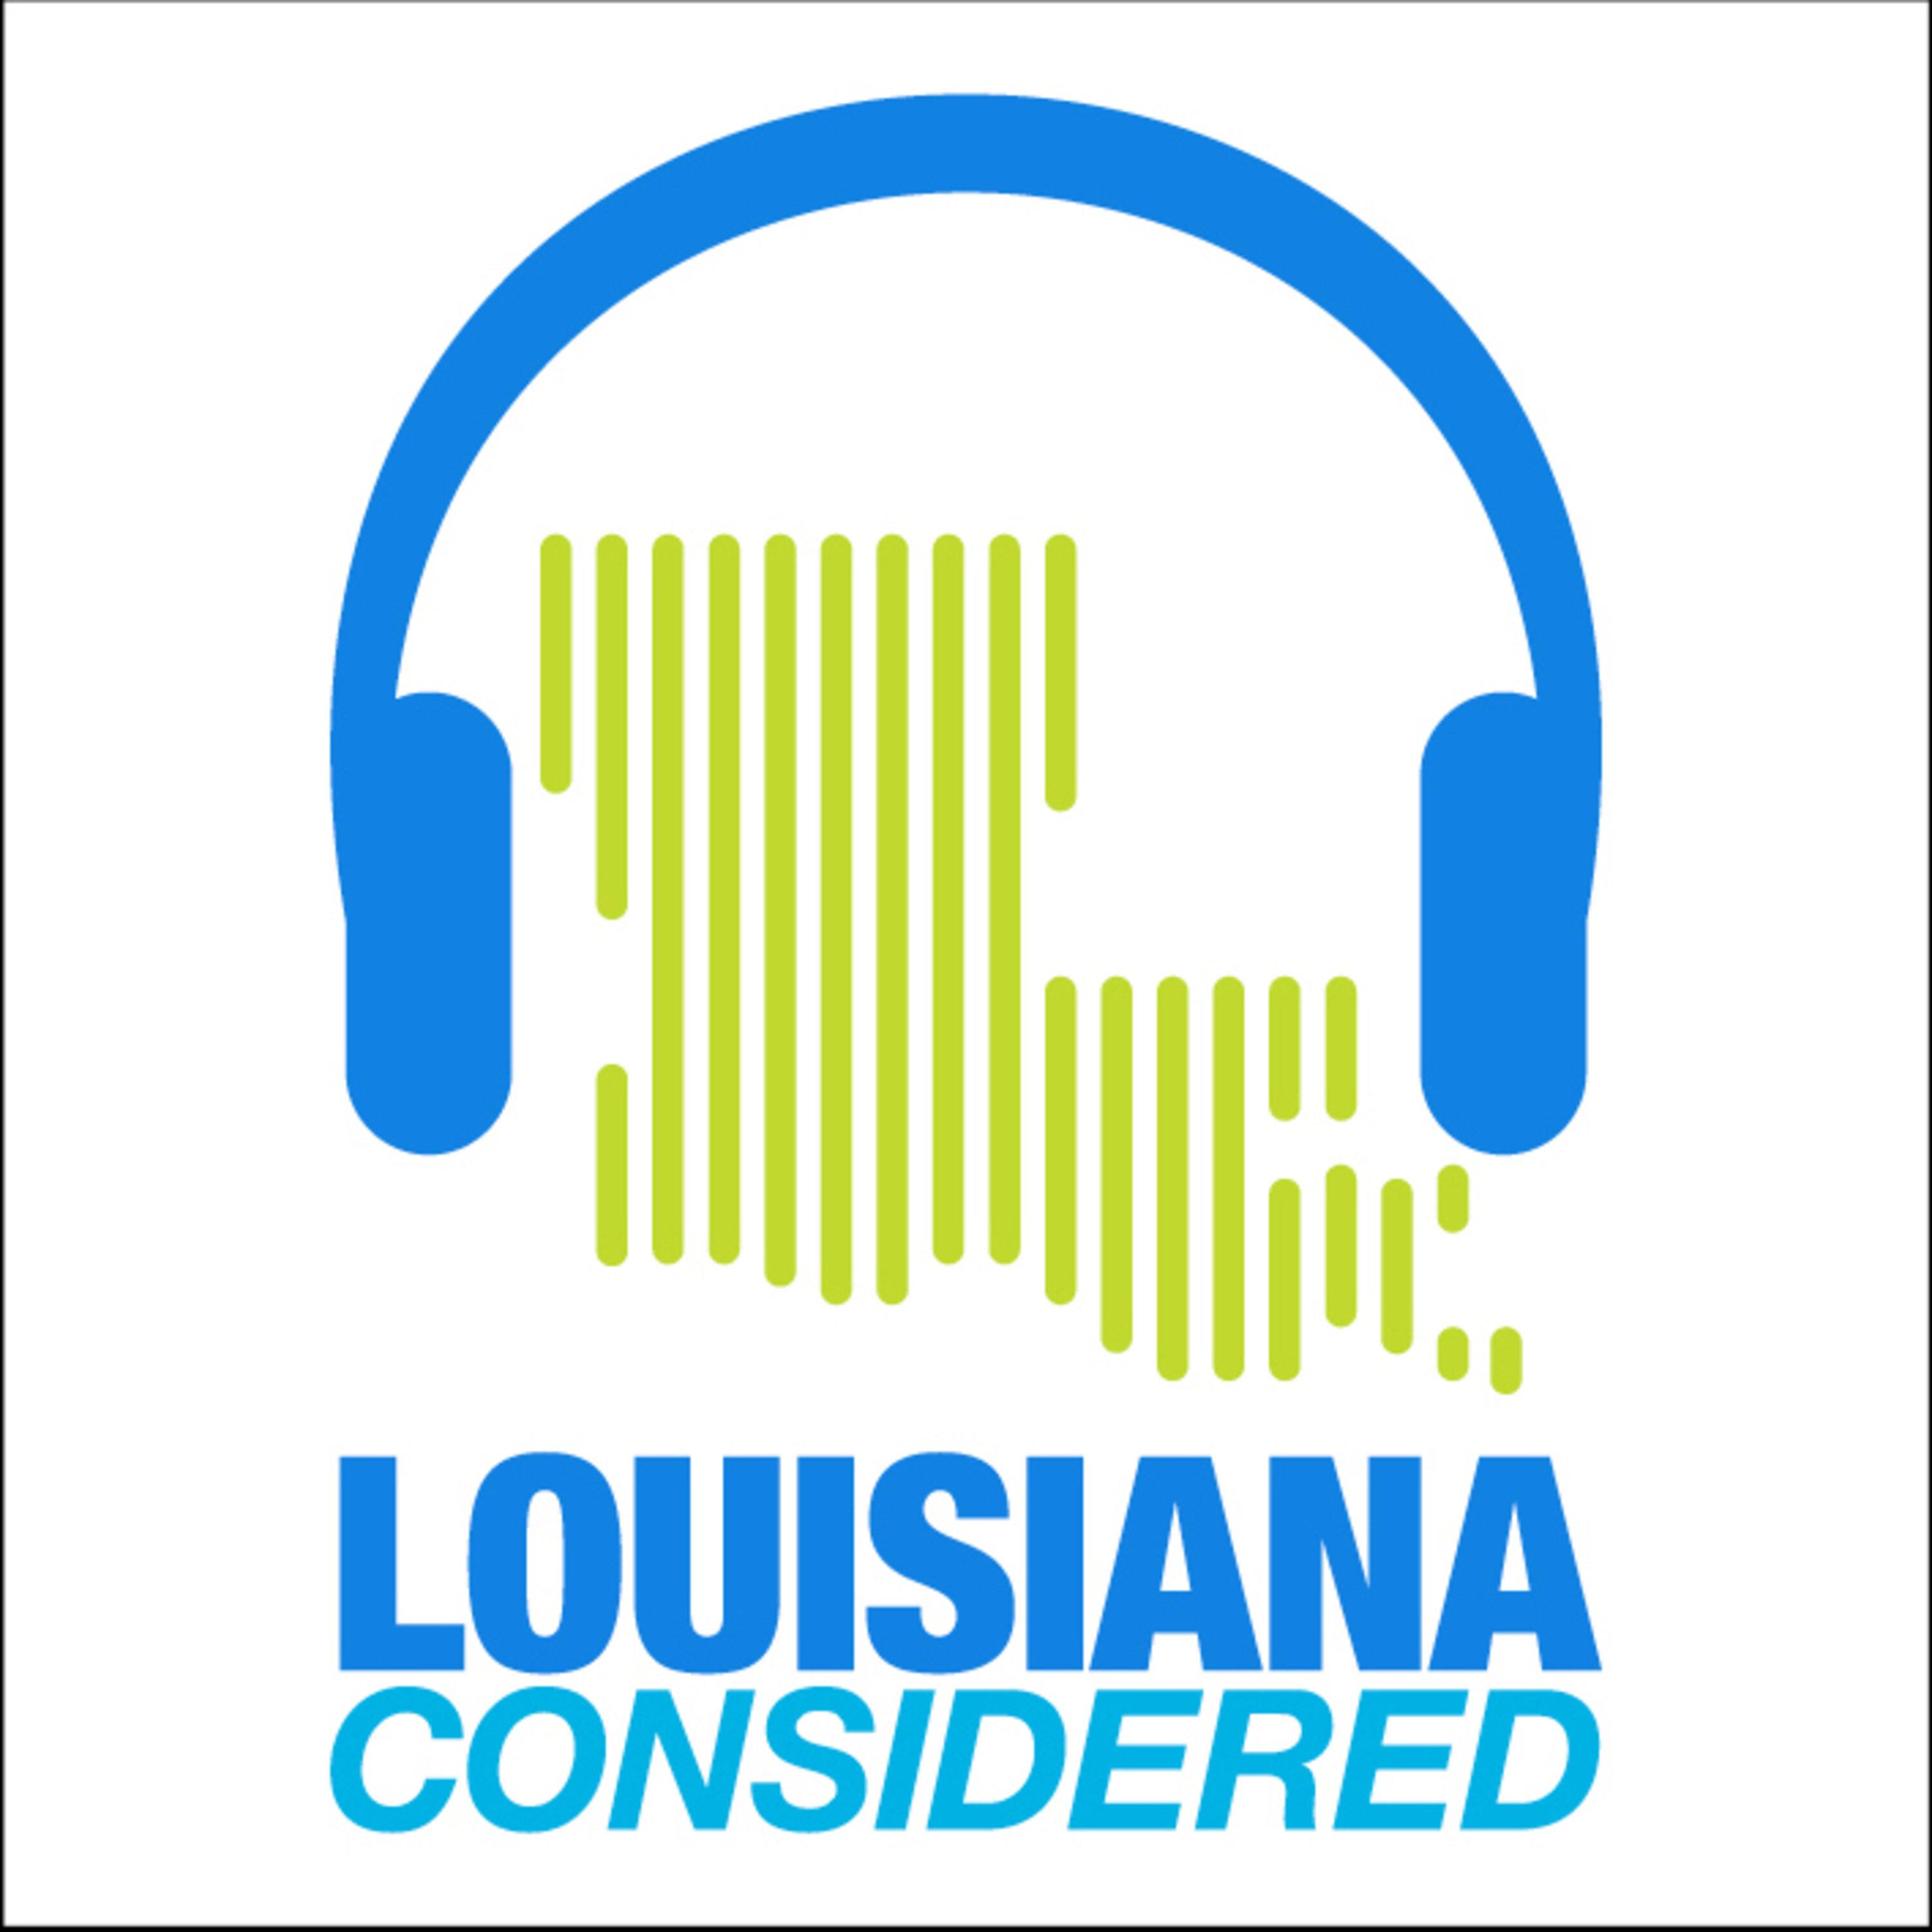 Thumbnail for "Louisiana Considered: Preserving New Orleans’ Cemeteries, NASA’s Plans To Explore Venus".